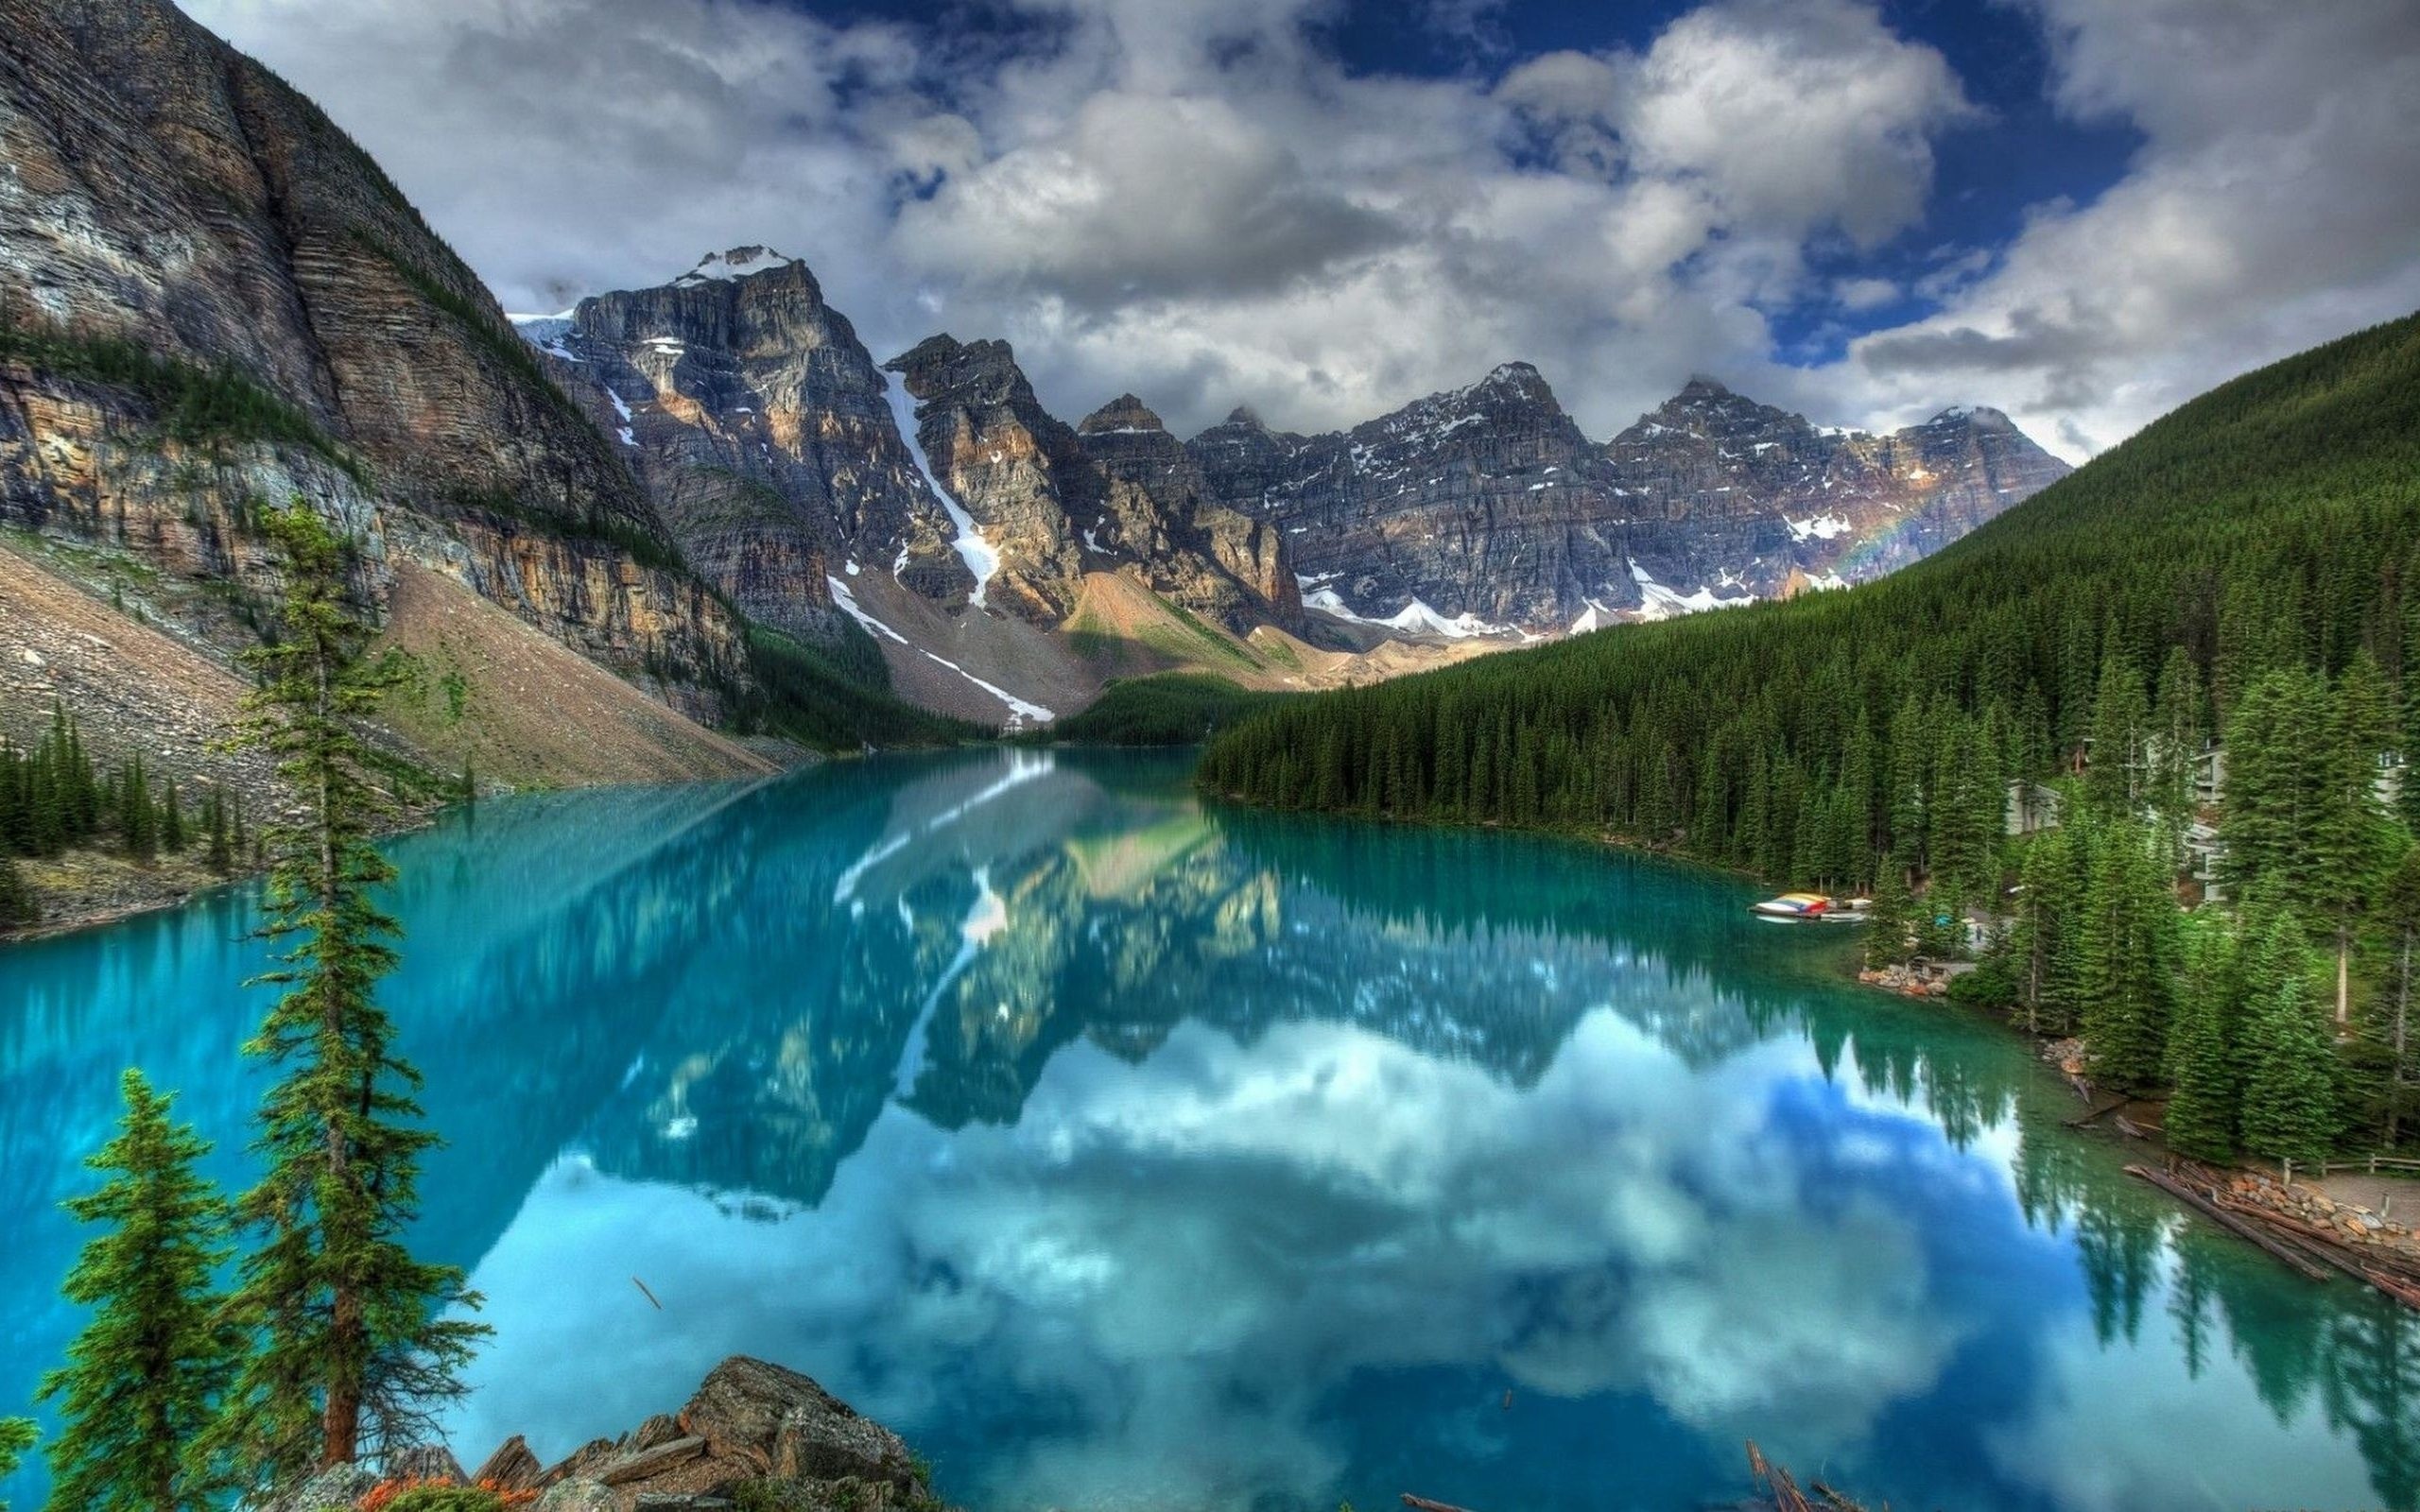 This Is The Best I Could Do One Is In A Higher Quality - Moraine Lake - HD Wallpaper 